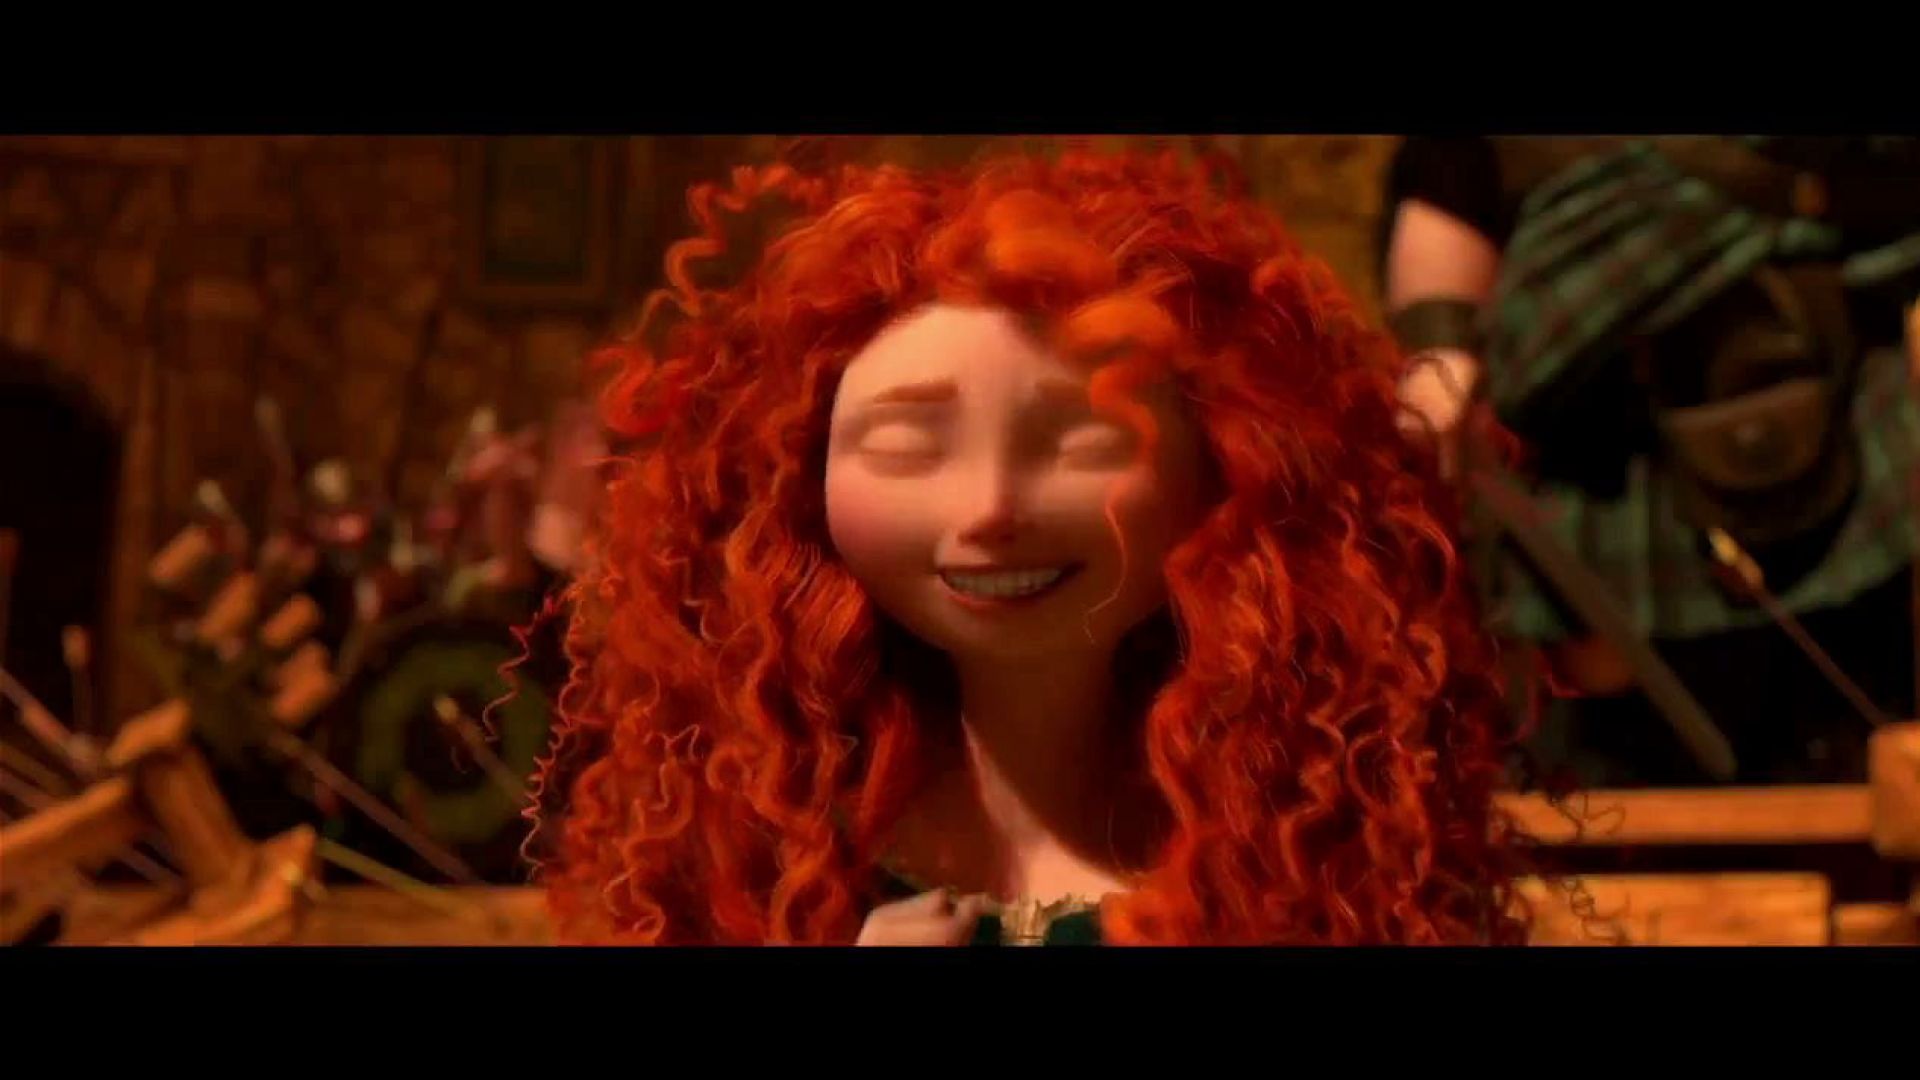 Merida introduces her hungry brothers. Hamish, Hubert and Harris. Brave